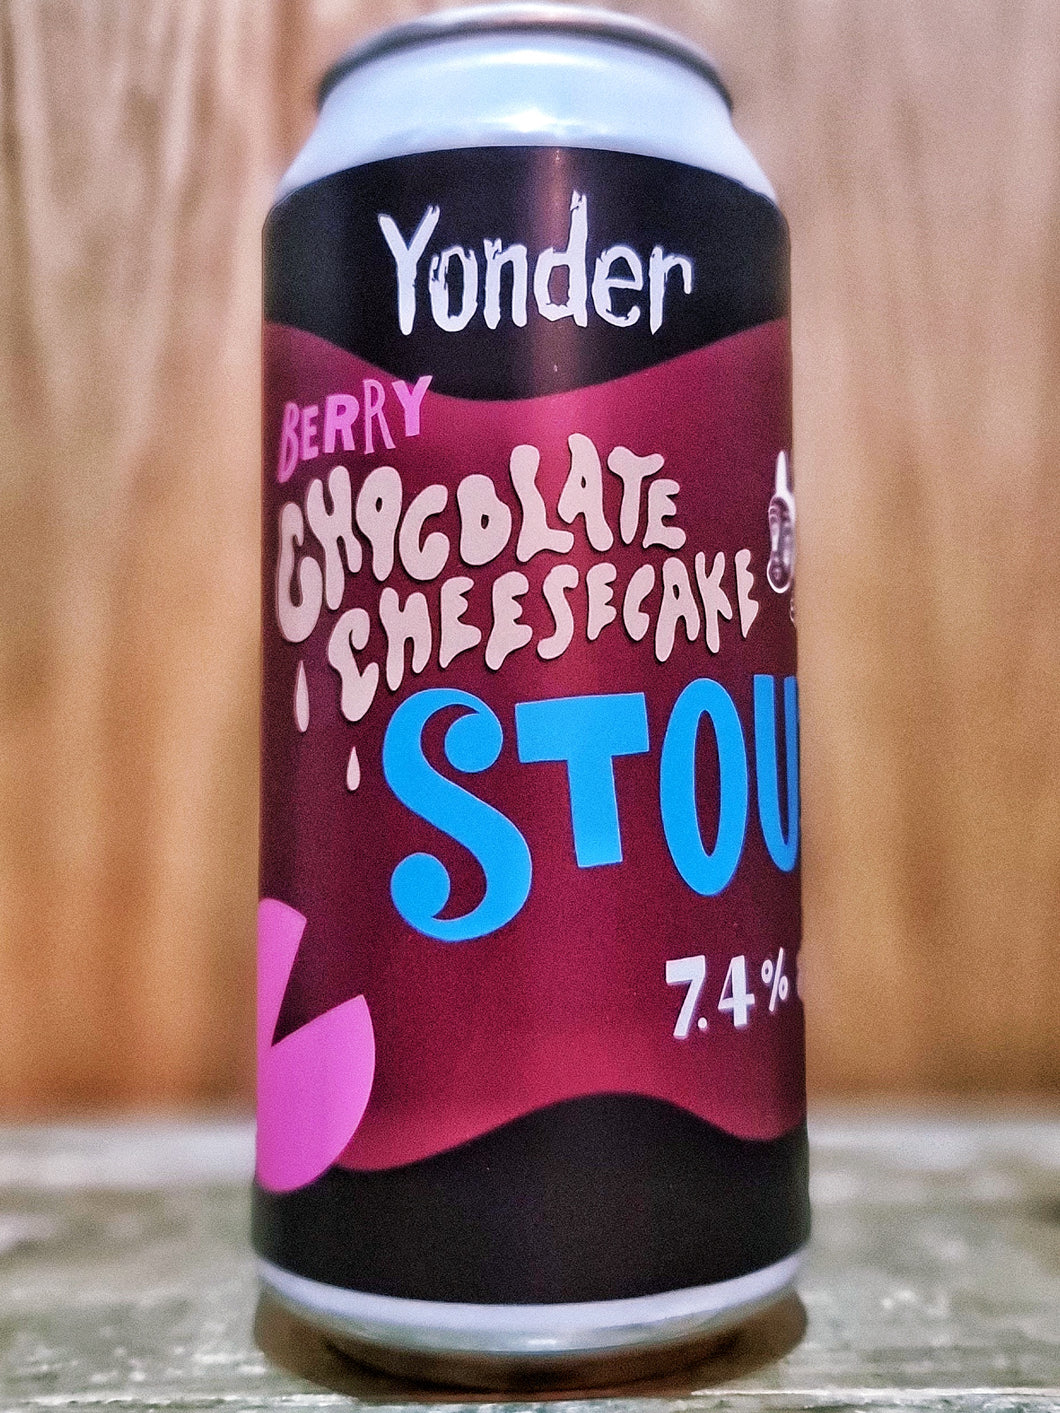 Yonder Brewing - Berry Chocolate Cheesecake Stout